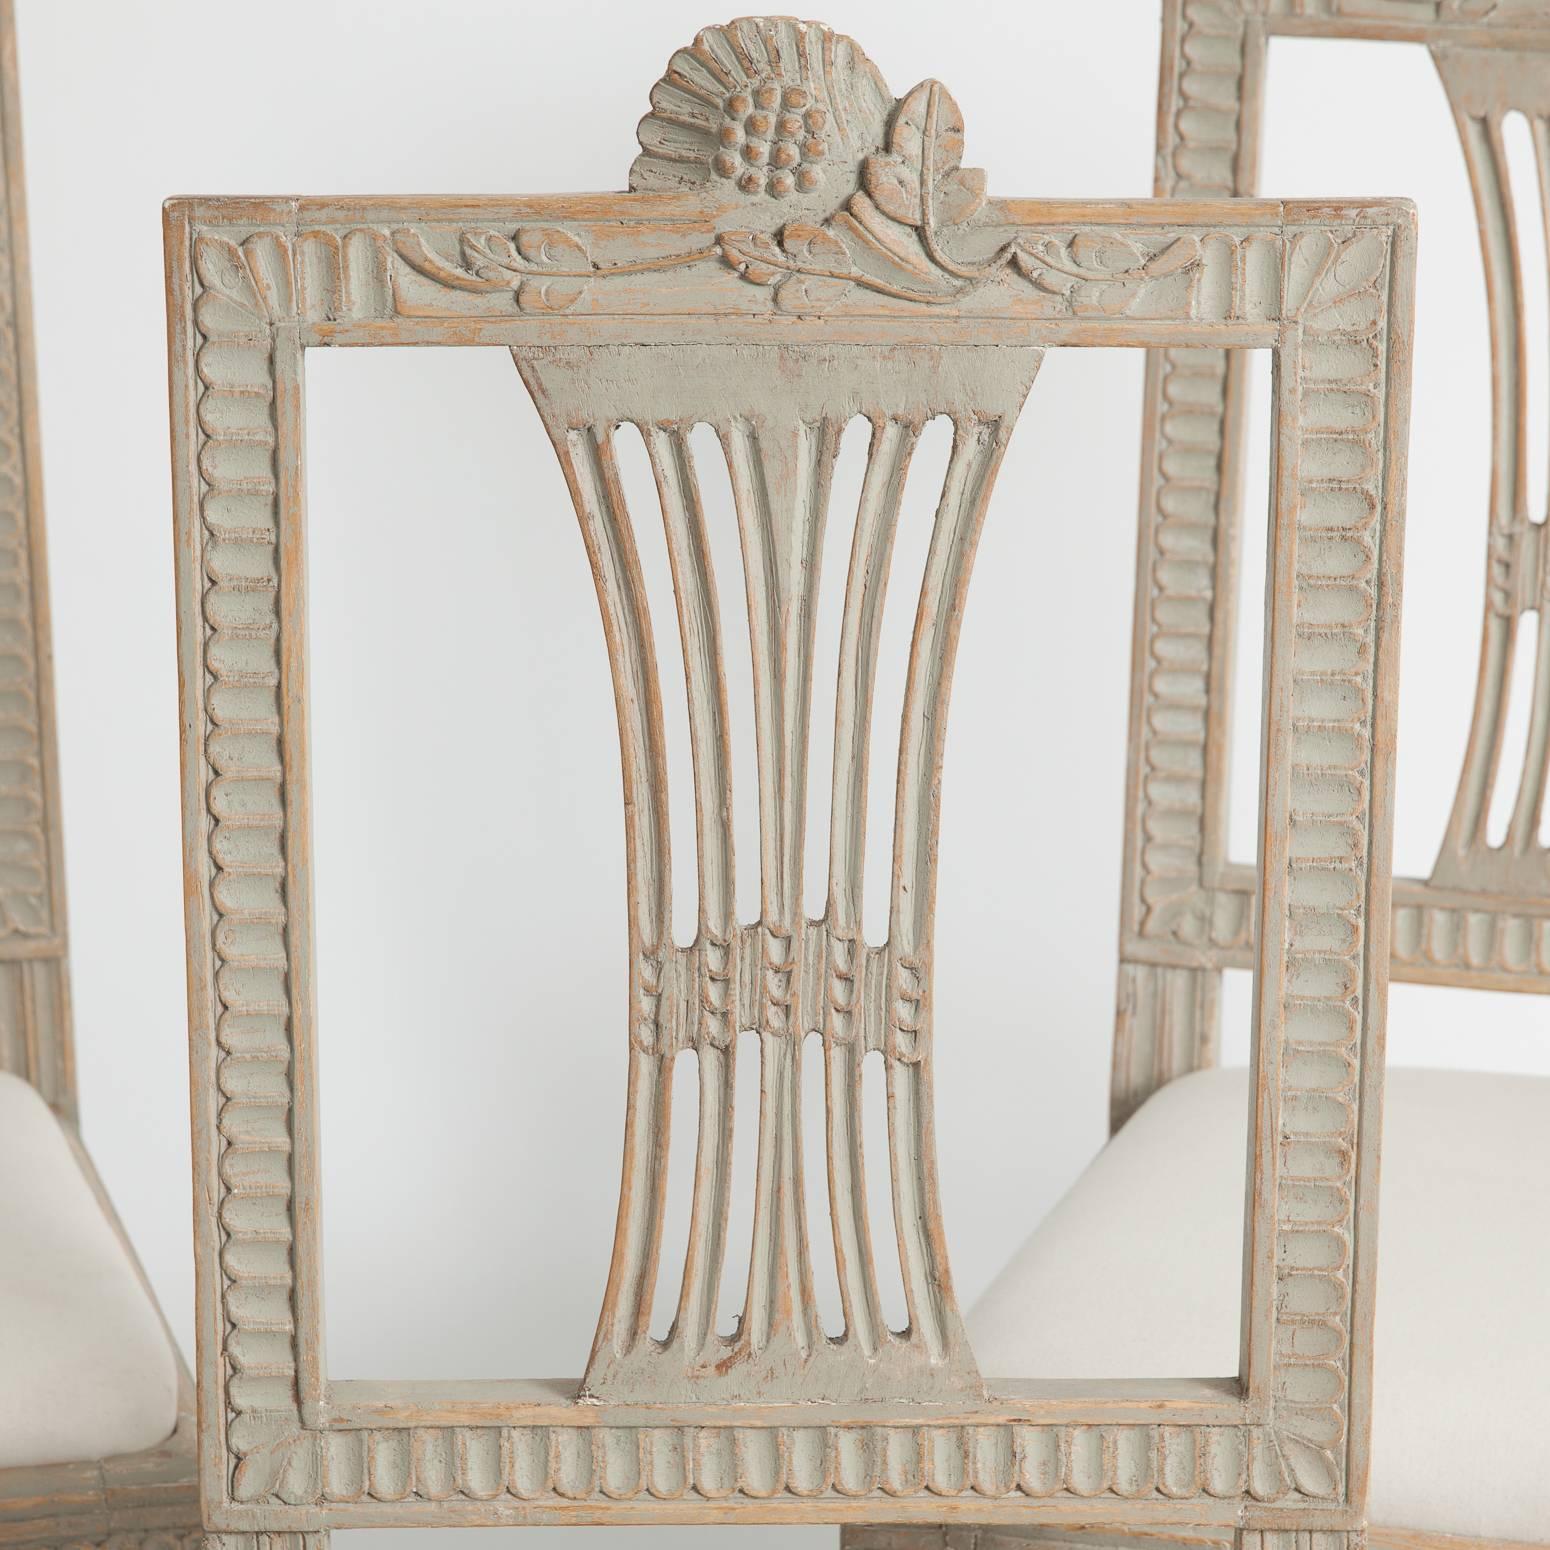 This set of four beautifully detailed chairs bear the fruit and flower carvings of the hops plant, the signature of the Lindome furniture maker's guild in Sweden. The wooden backs with slats forming a fan shape, are framed by intricately carved